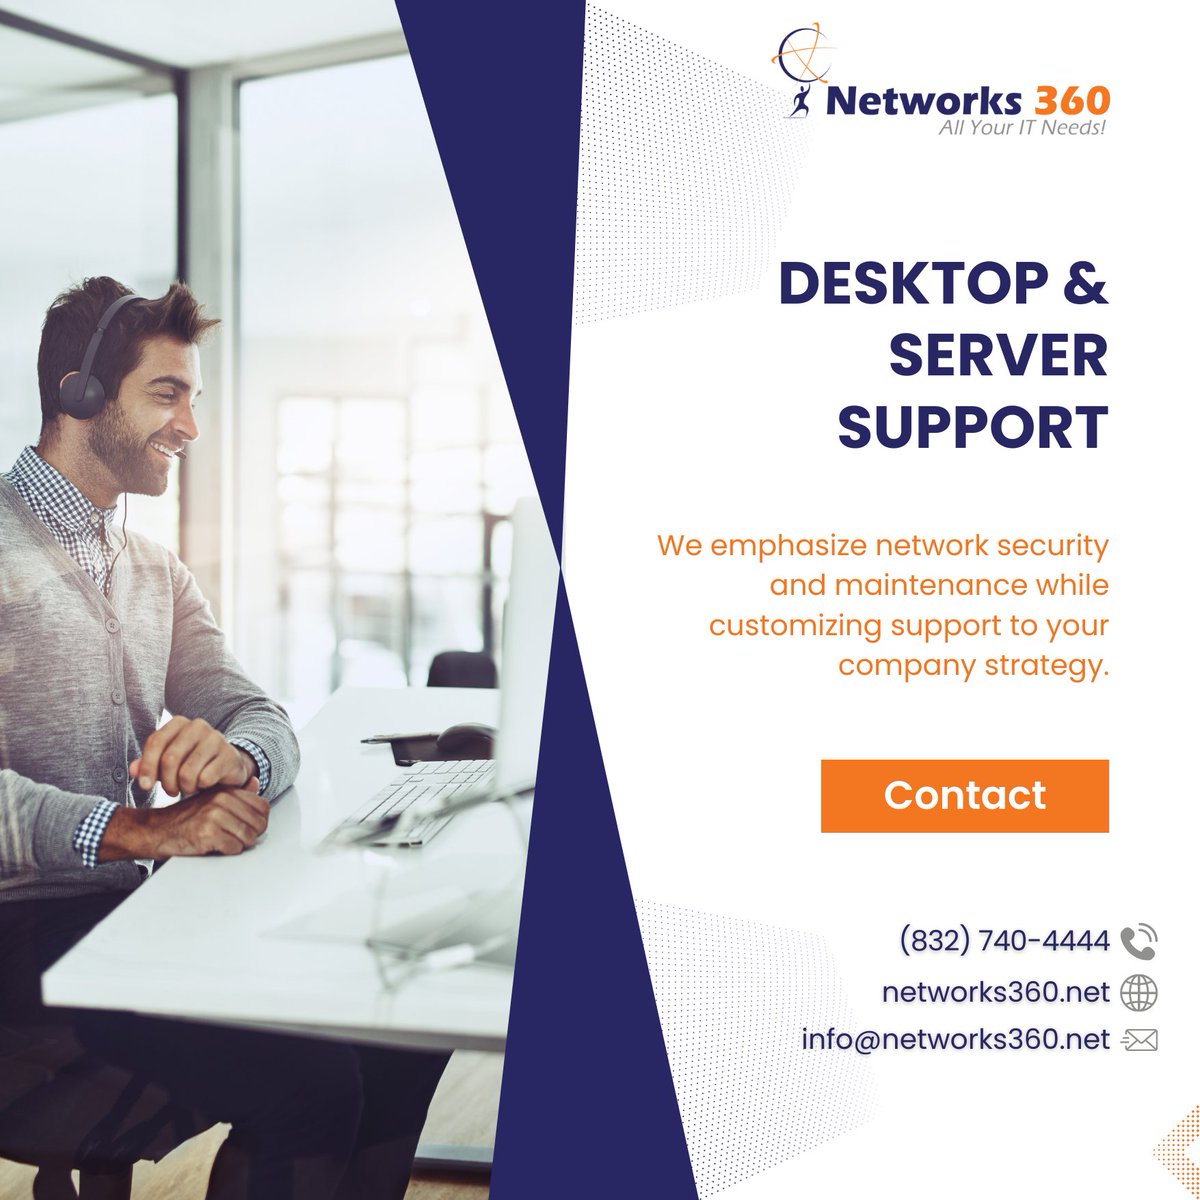 Improve Your Business IT with Desktop & Server Support from Networks360

networks360.net

#Networks360 #DesktopSupport #ServerSupport #ITExcellence #houstontx #usa #BackupSolution #DigitalProtection #DisasterRecovery #TechManagement #BusinessTech #SEO #Houston